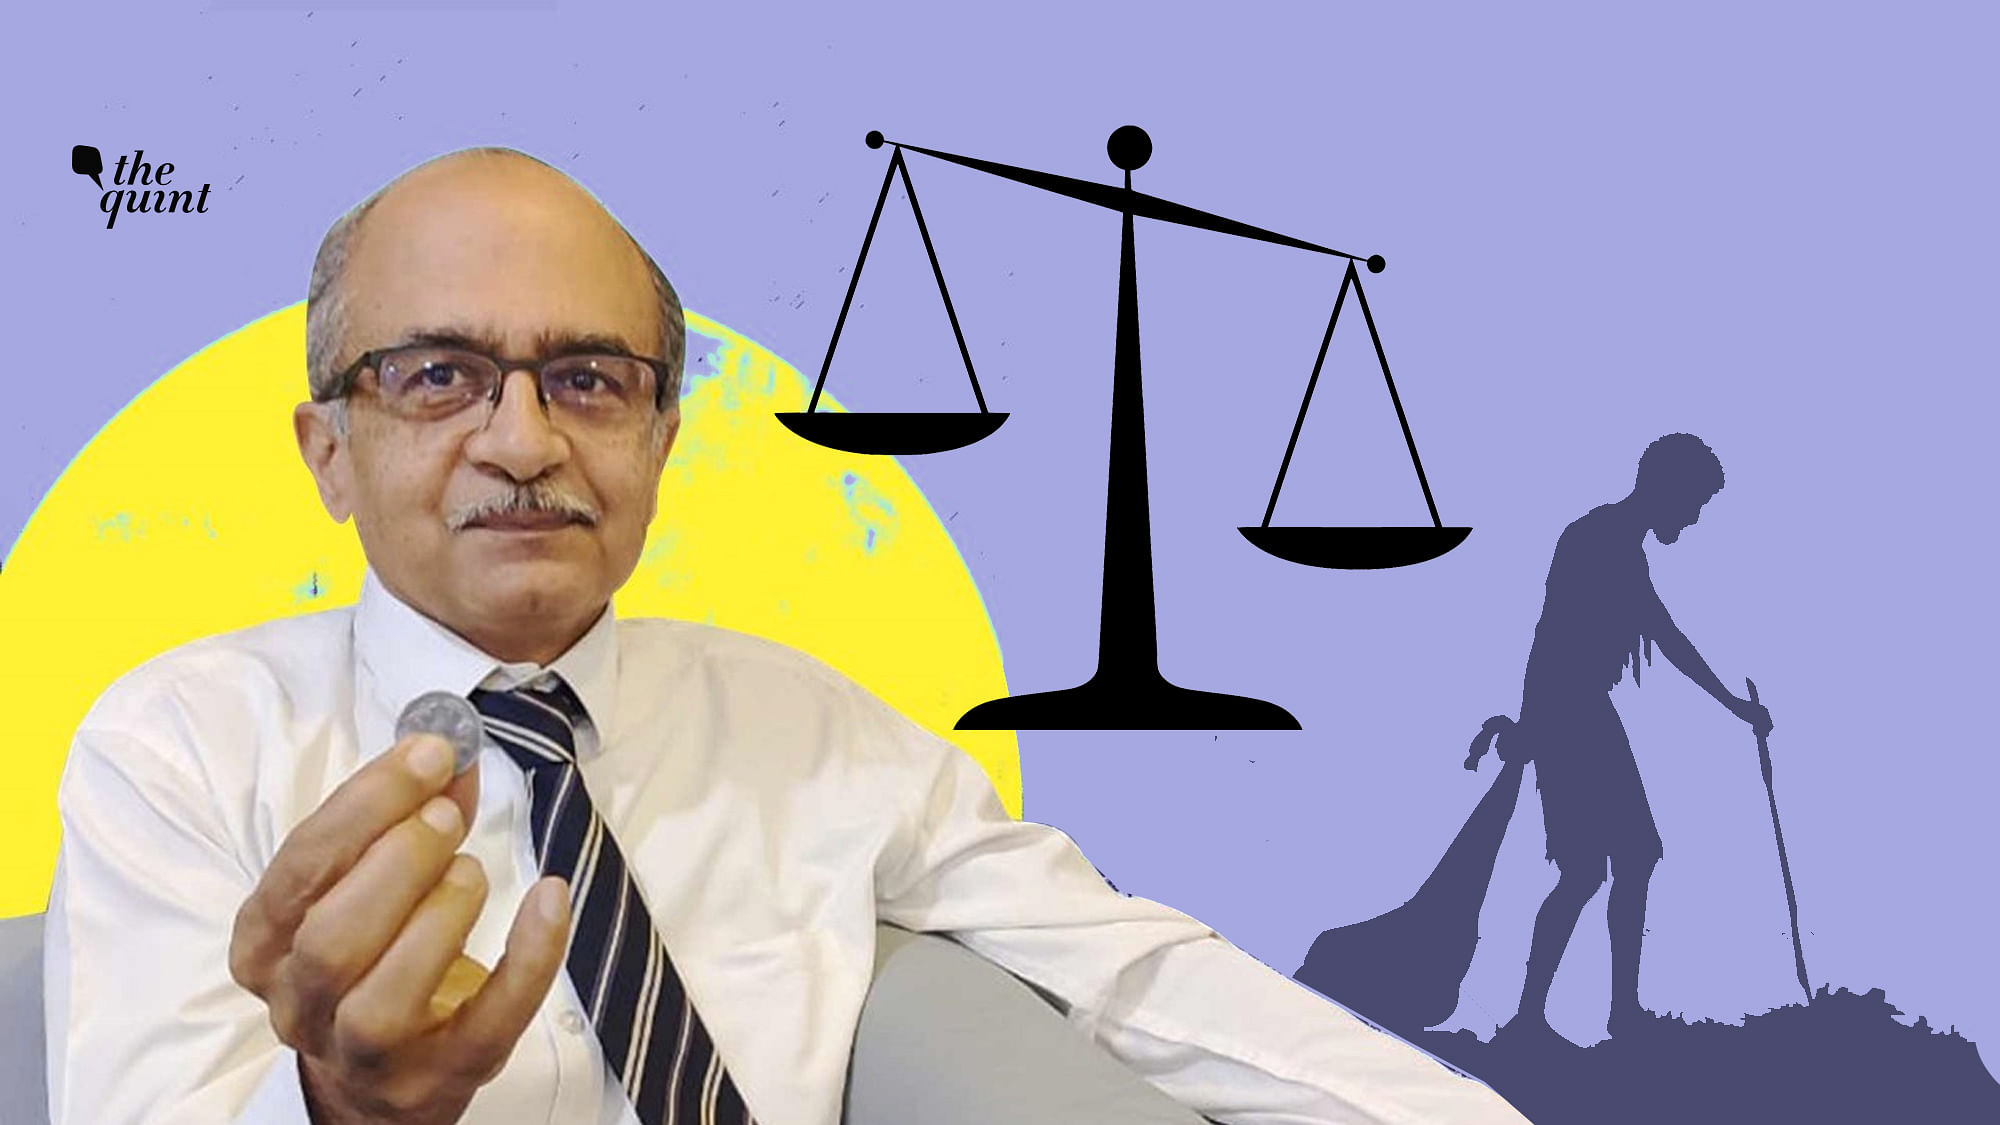 The SC fined Prashant Bhushan Re 1 for contempt, but the poor don’t get so lucky in India’s legal system.